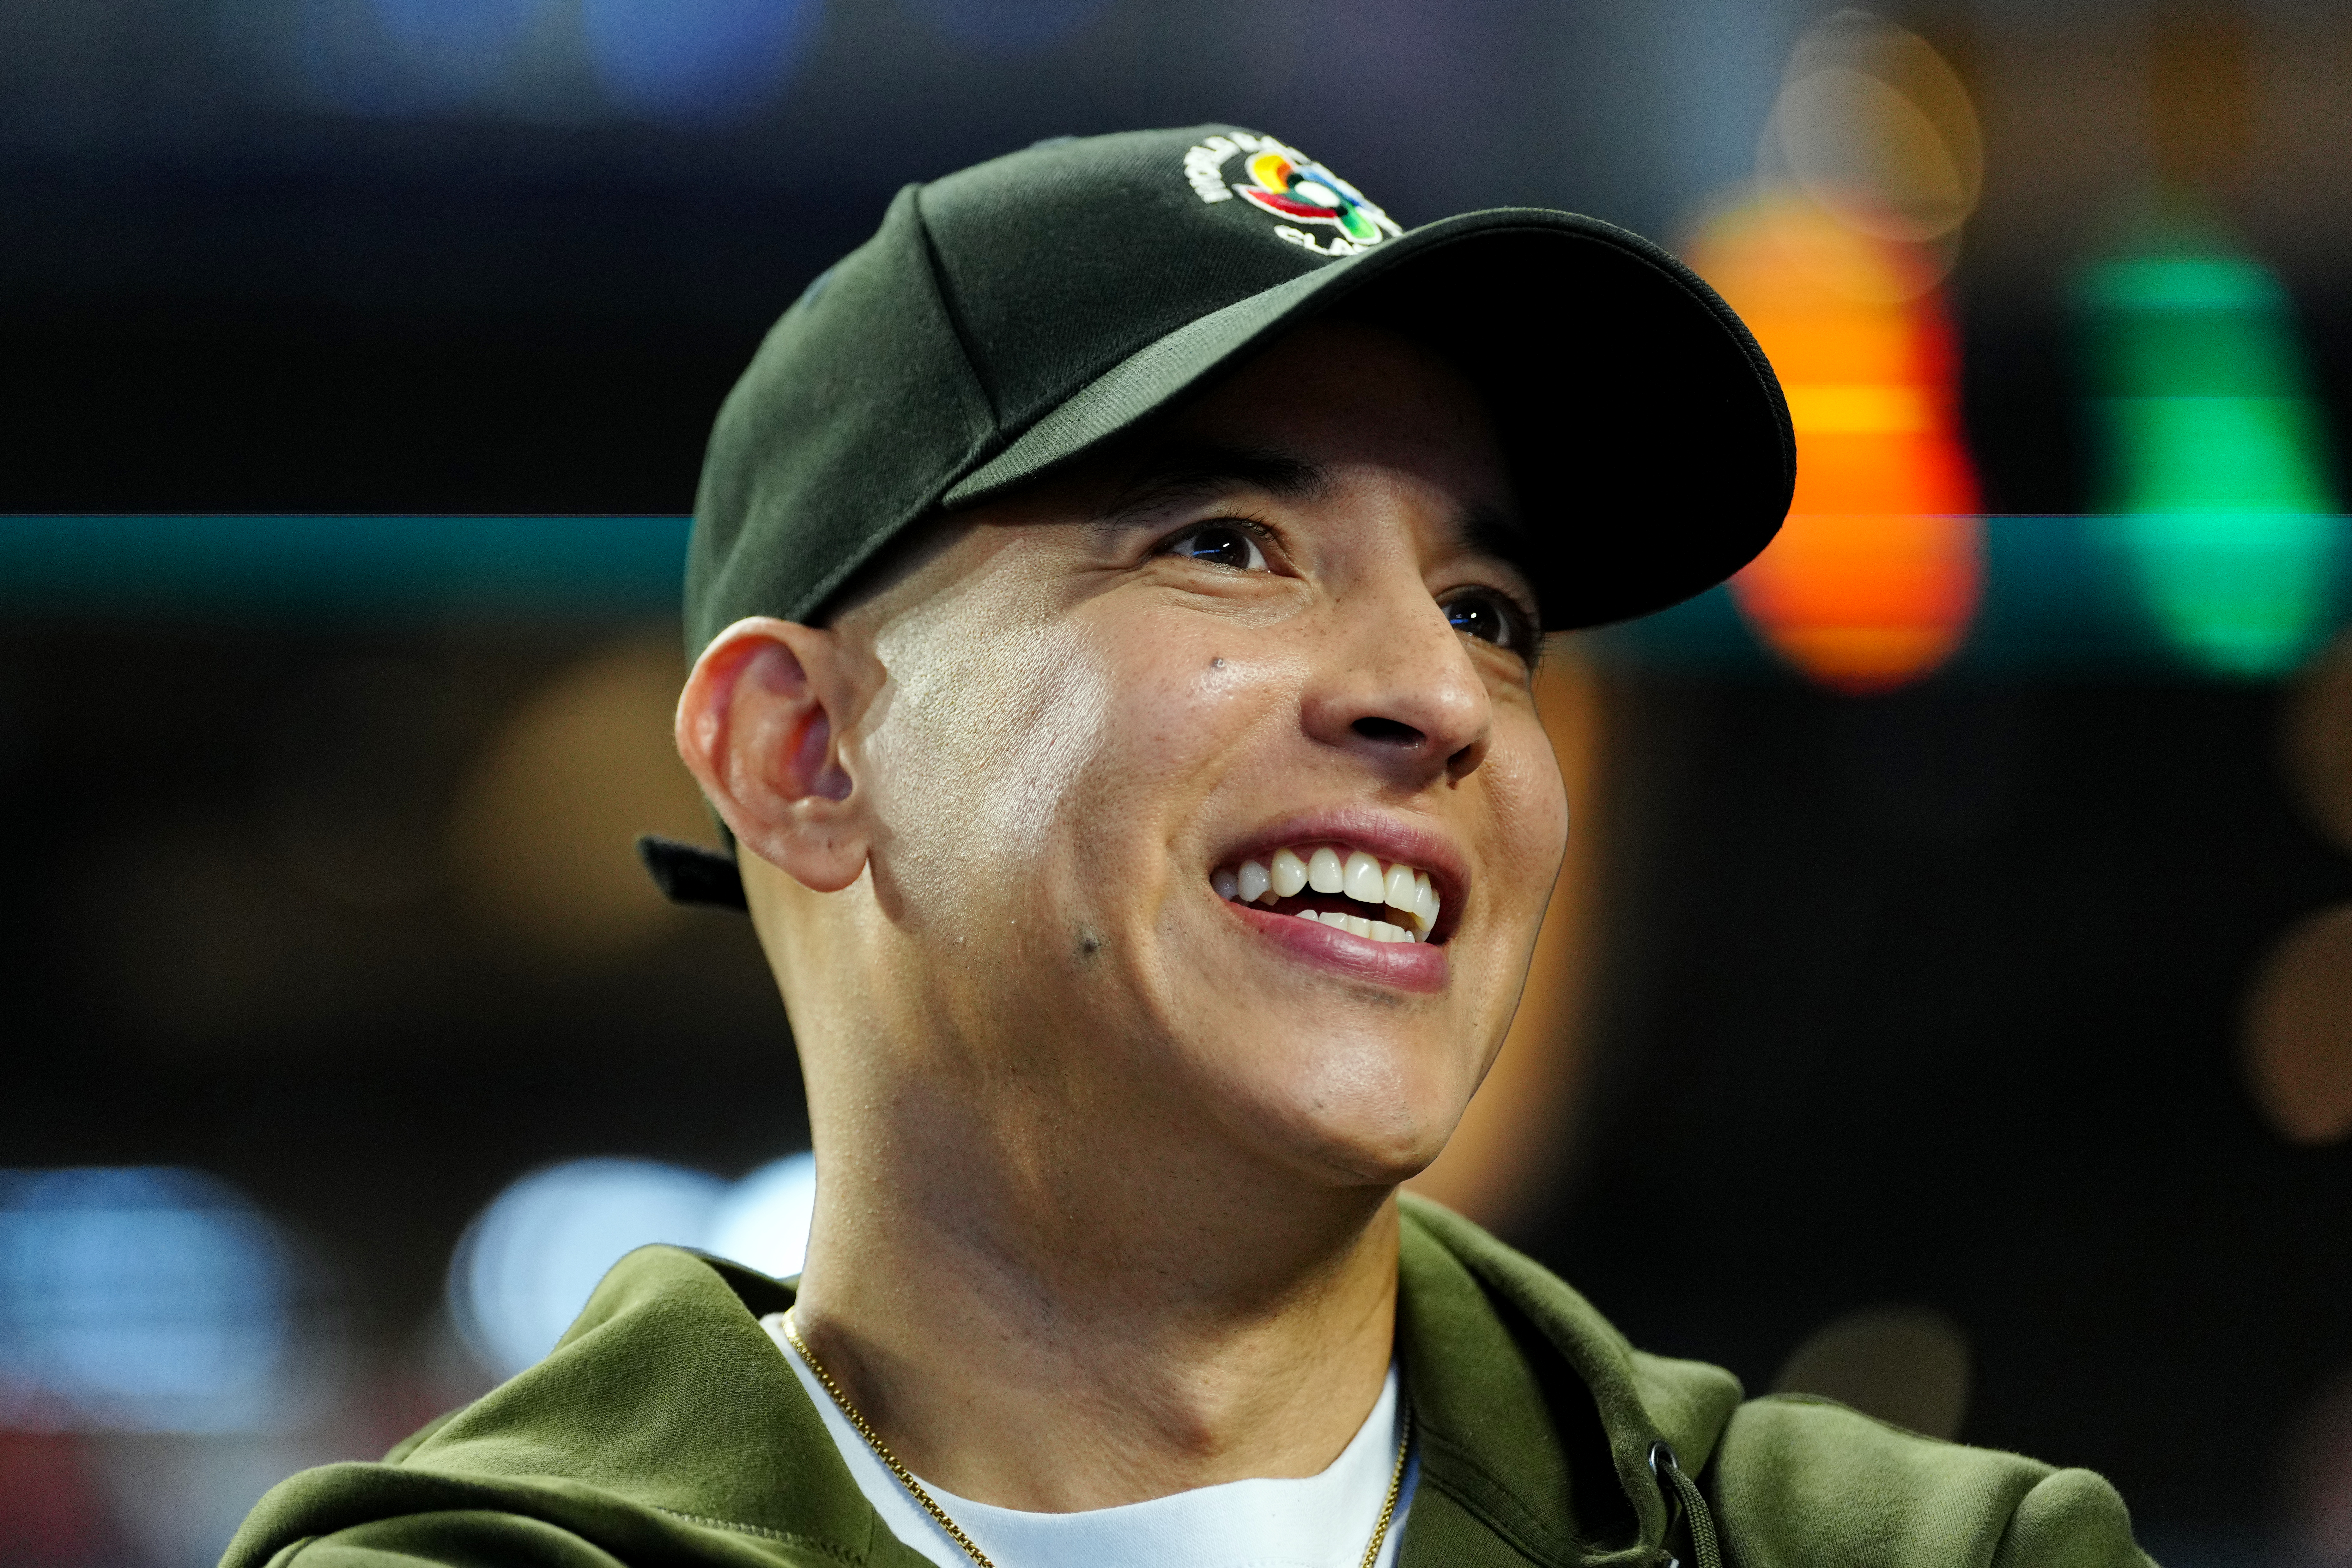 Daddy Yankee attend the 2023 World Baseball Classic Championship game between Team USA and Team Japan at LoanDepot Park on Tuesday, March 21, 2023, in Miami, Florida. | Source: Getty Images